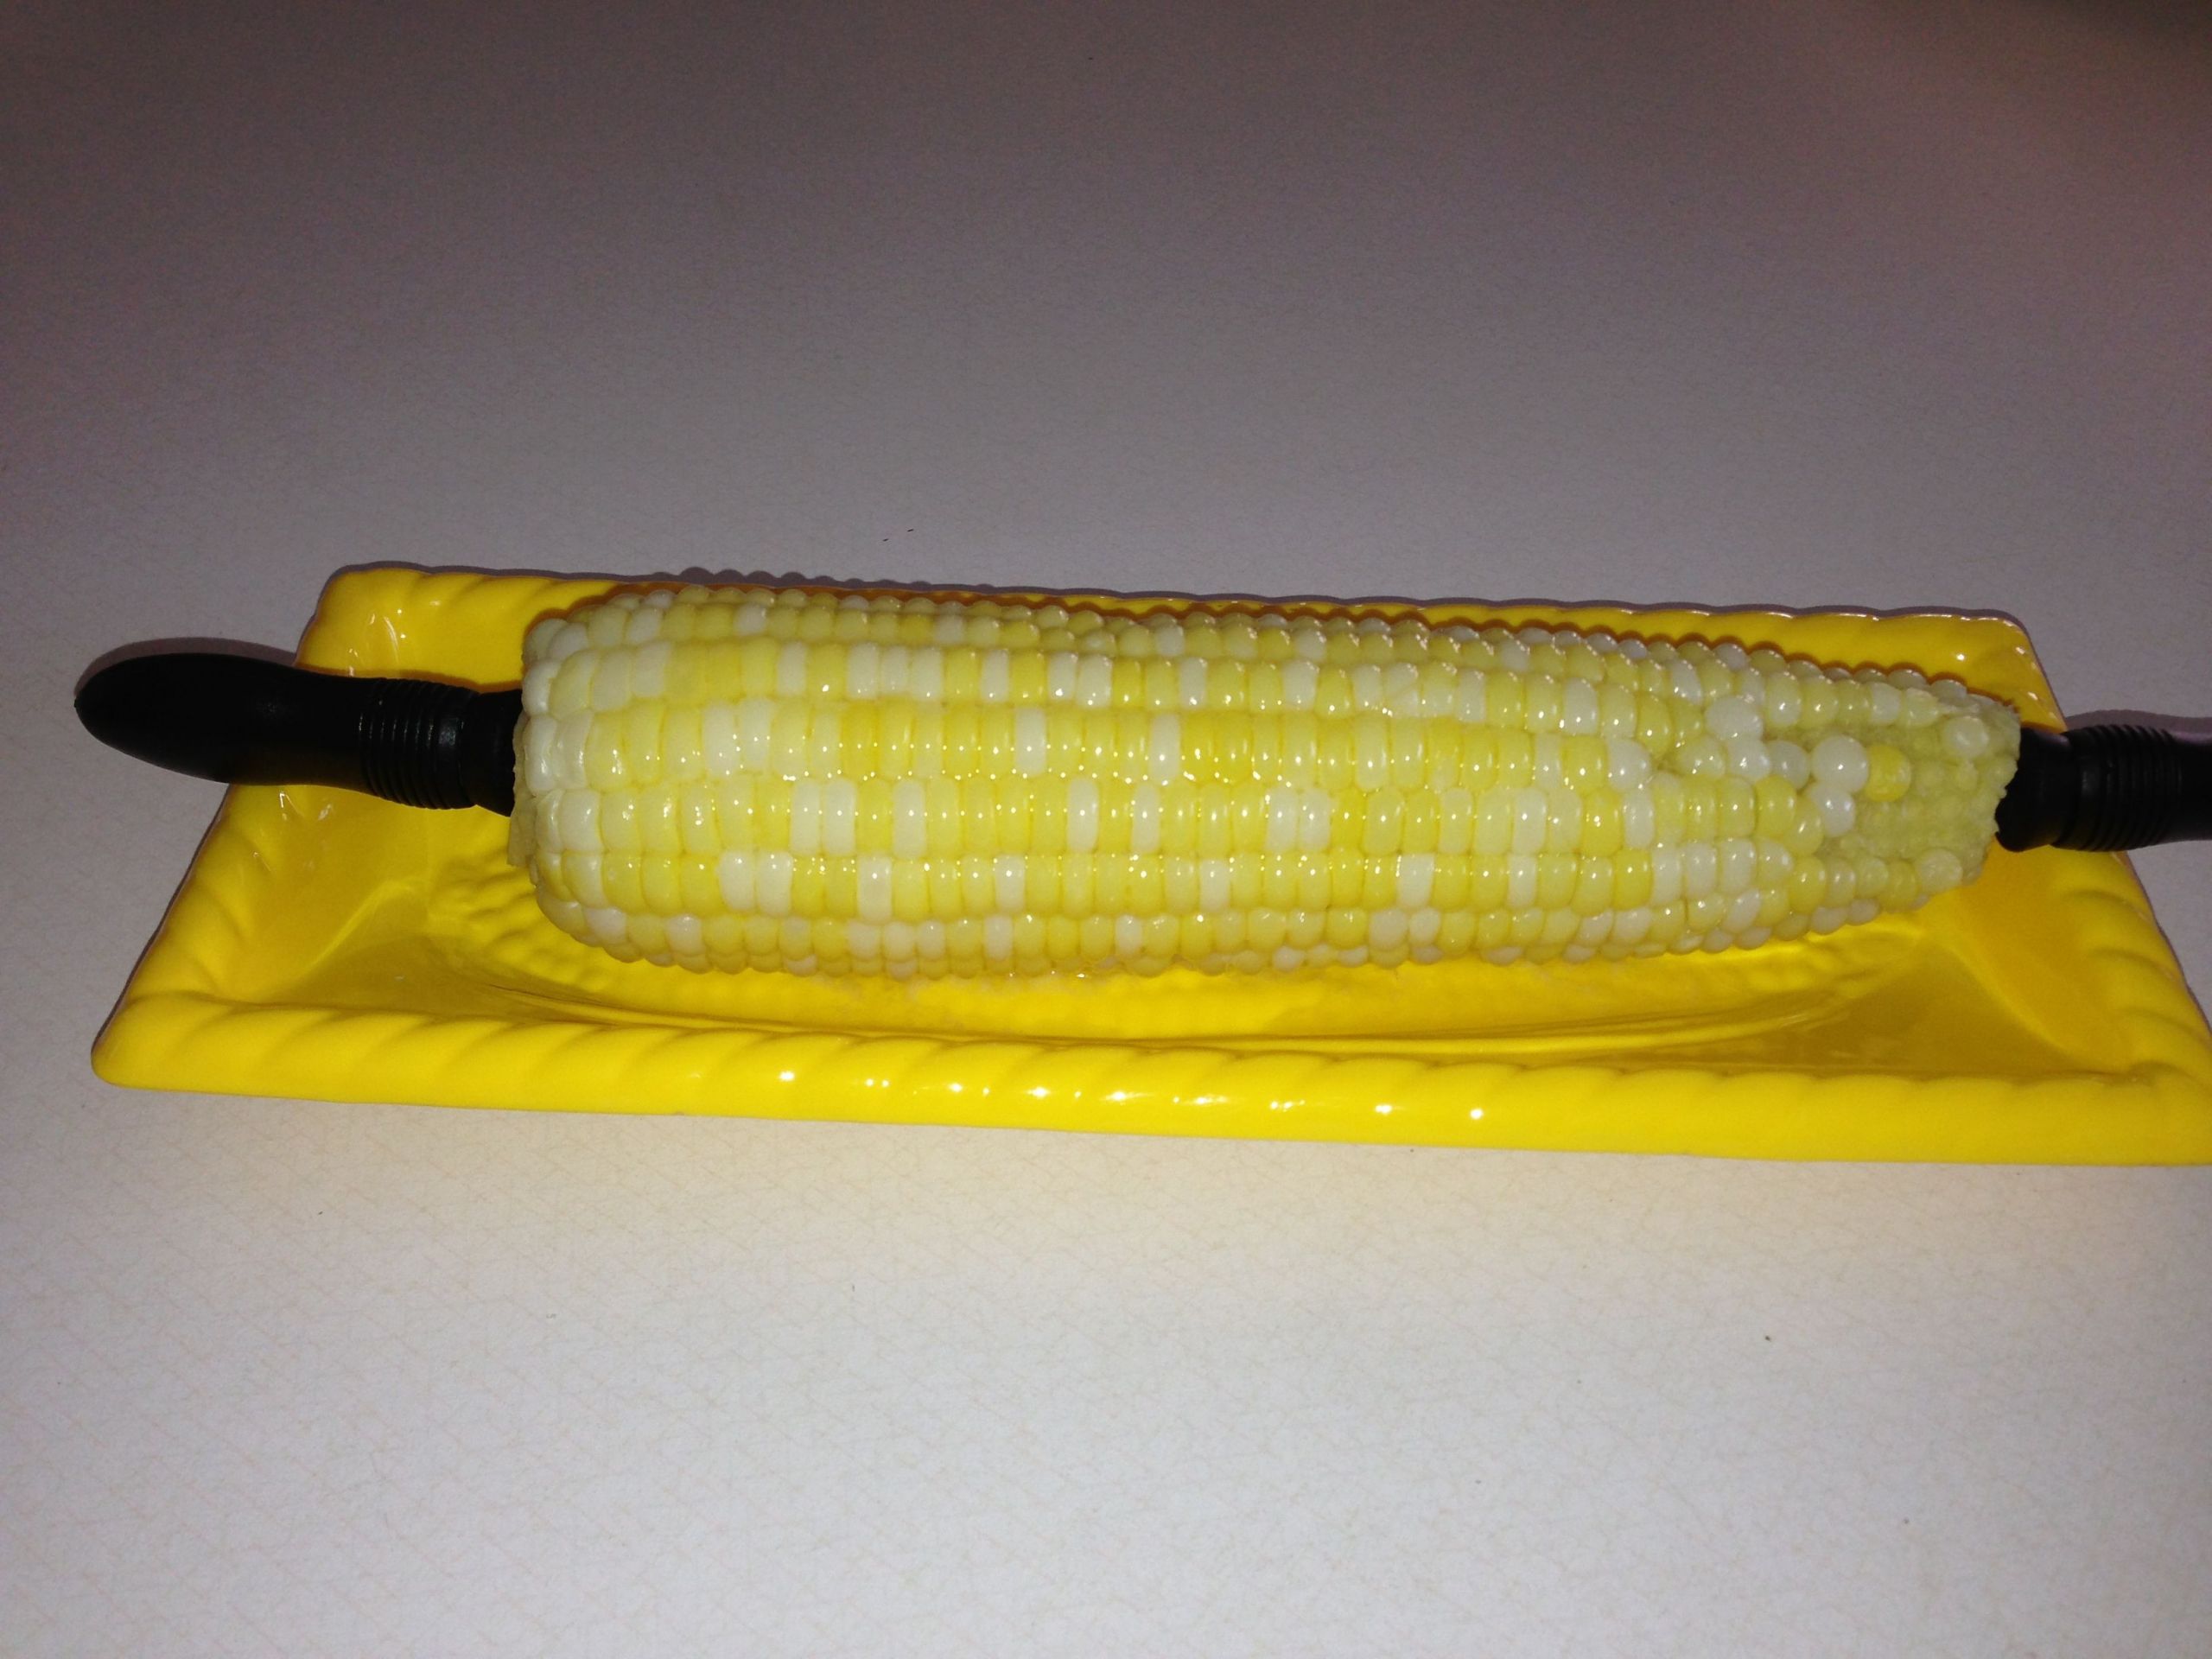 Microwave Corn On The Cob Wax Paper
 Got leftover corn on the cob Did you know you can wrap it